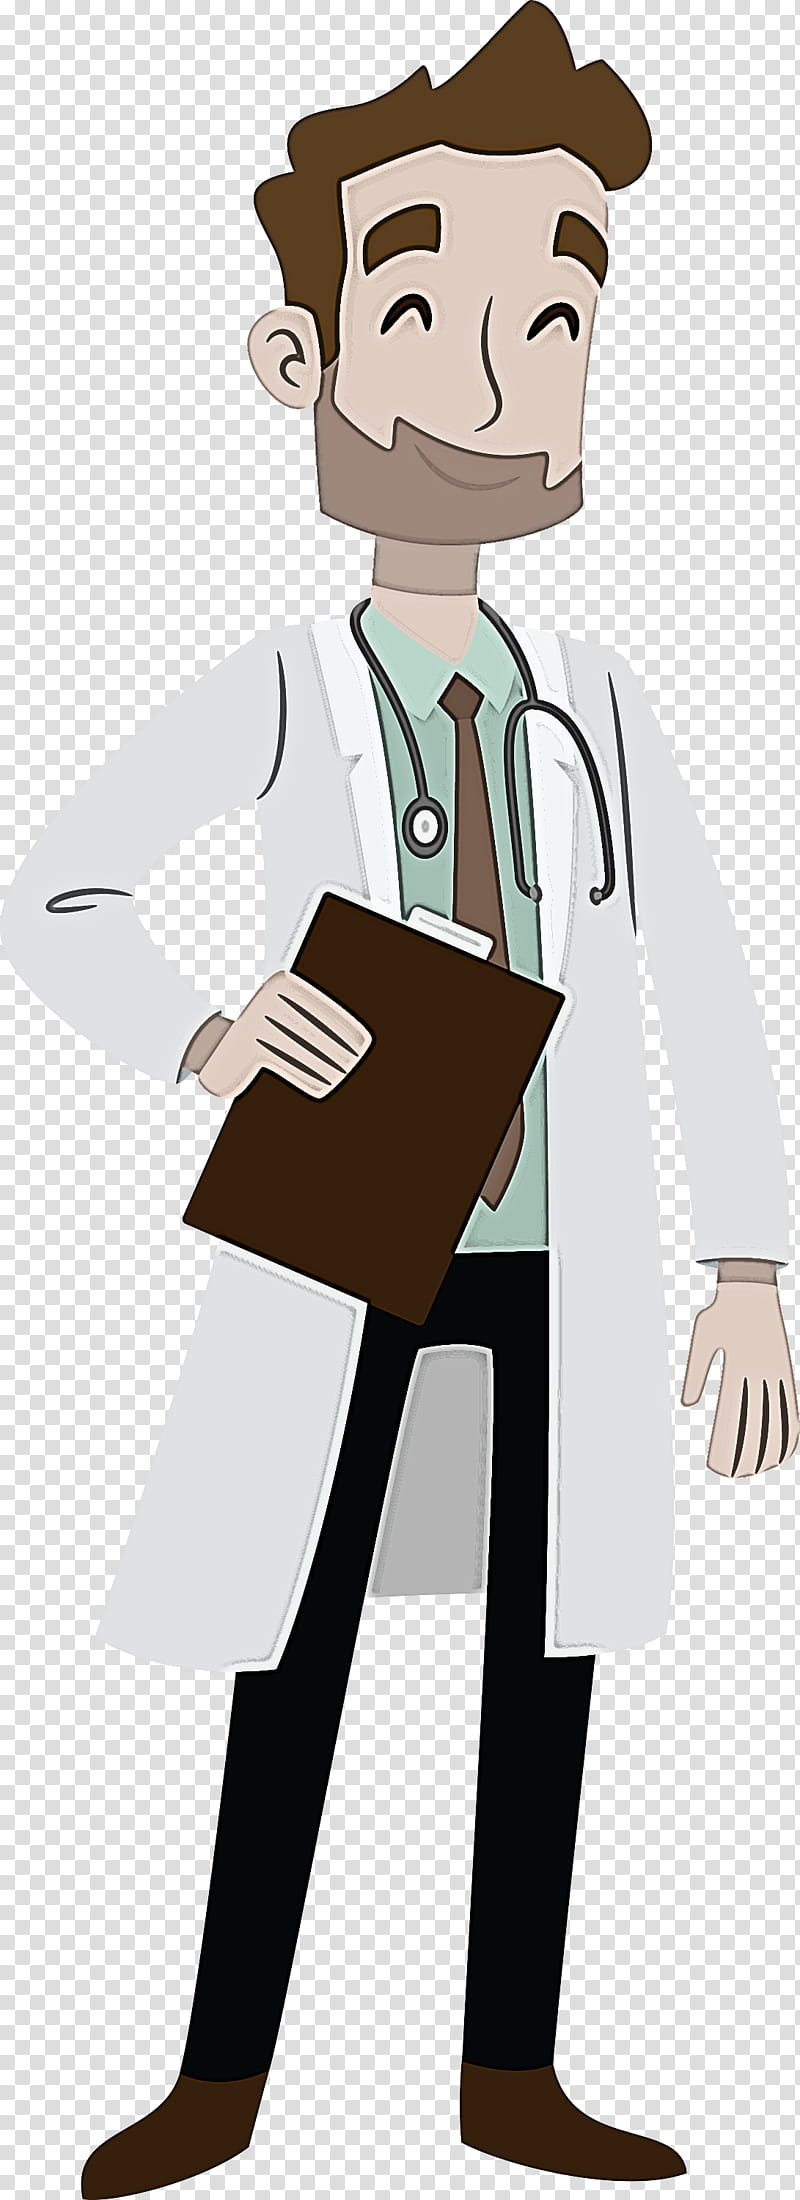 Stethoscope, Doctor Cartoon, Health, Symptom, Medicine, Therapy, Infection, Pneumonia transparent background PNG clipart